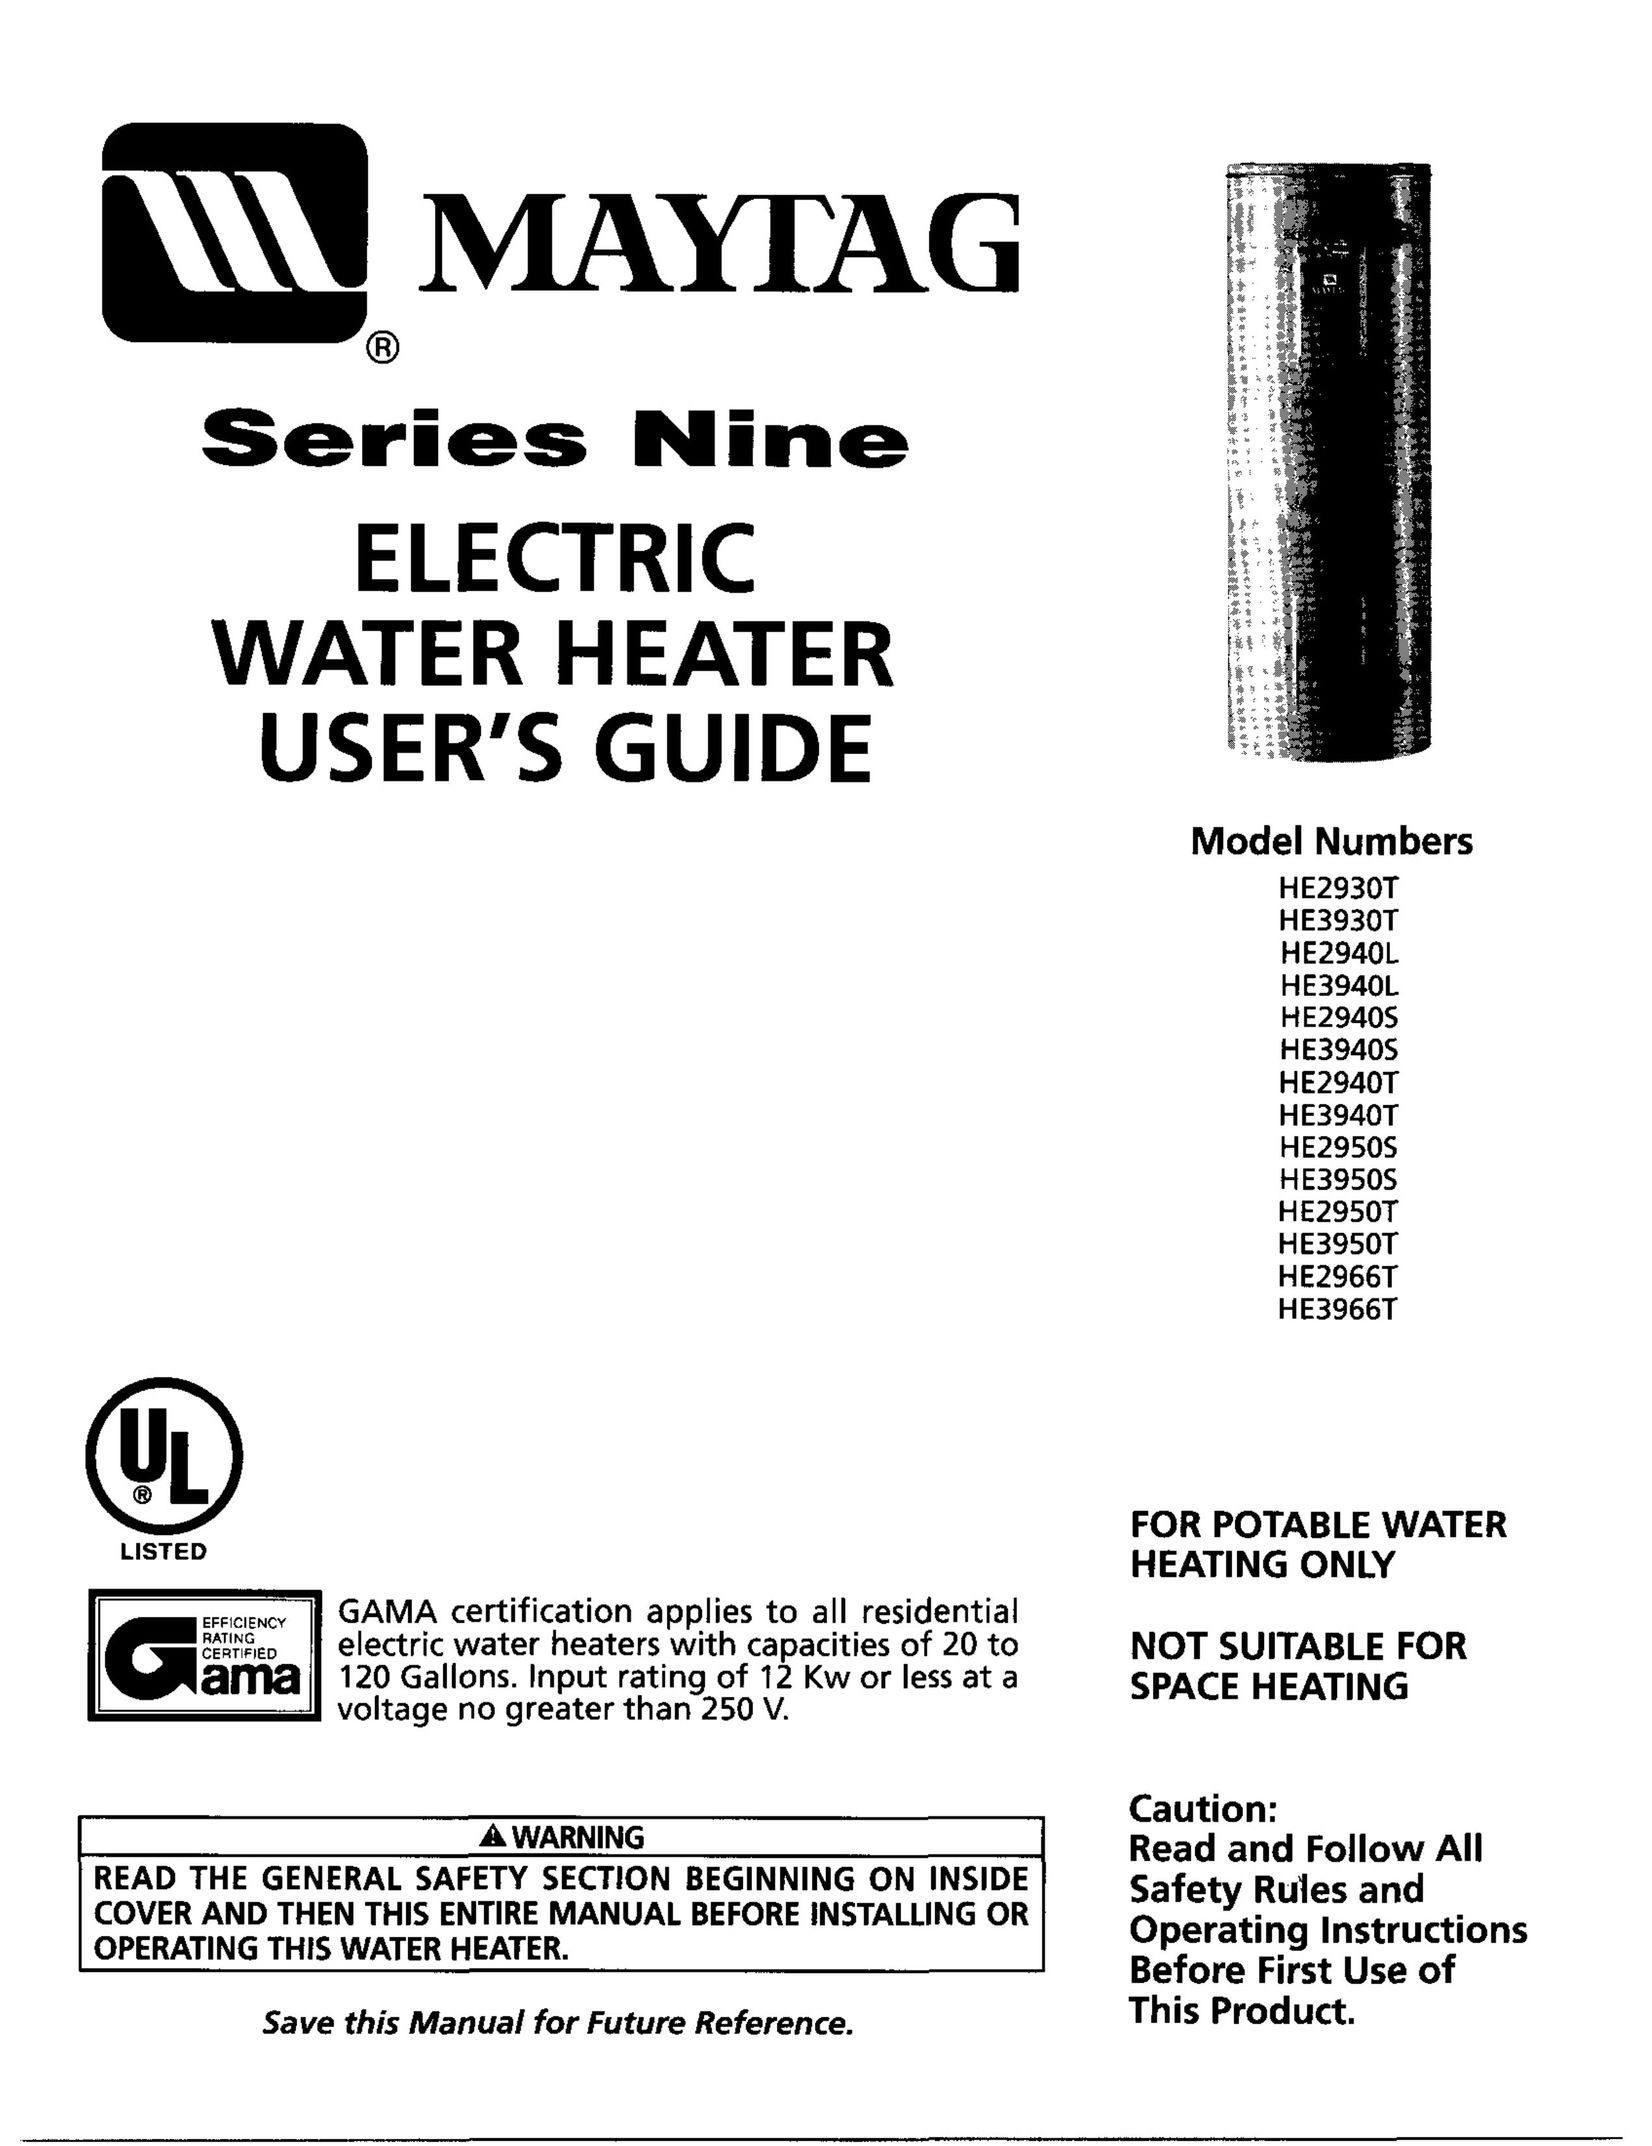 Maytag HE3940S Water Heater User Manual